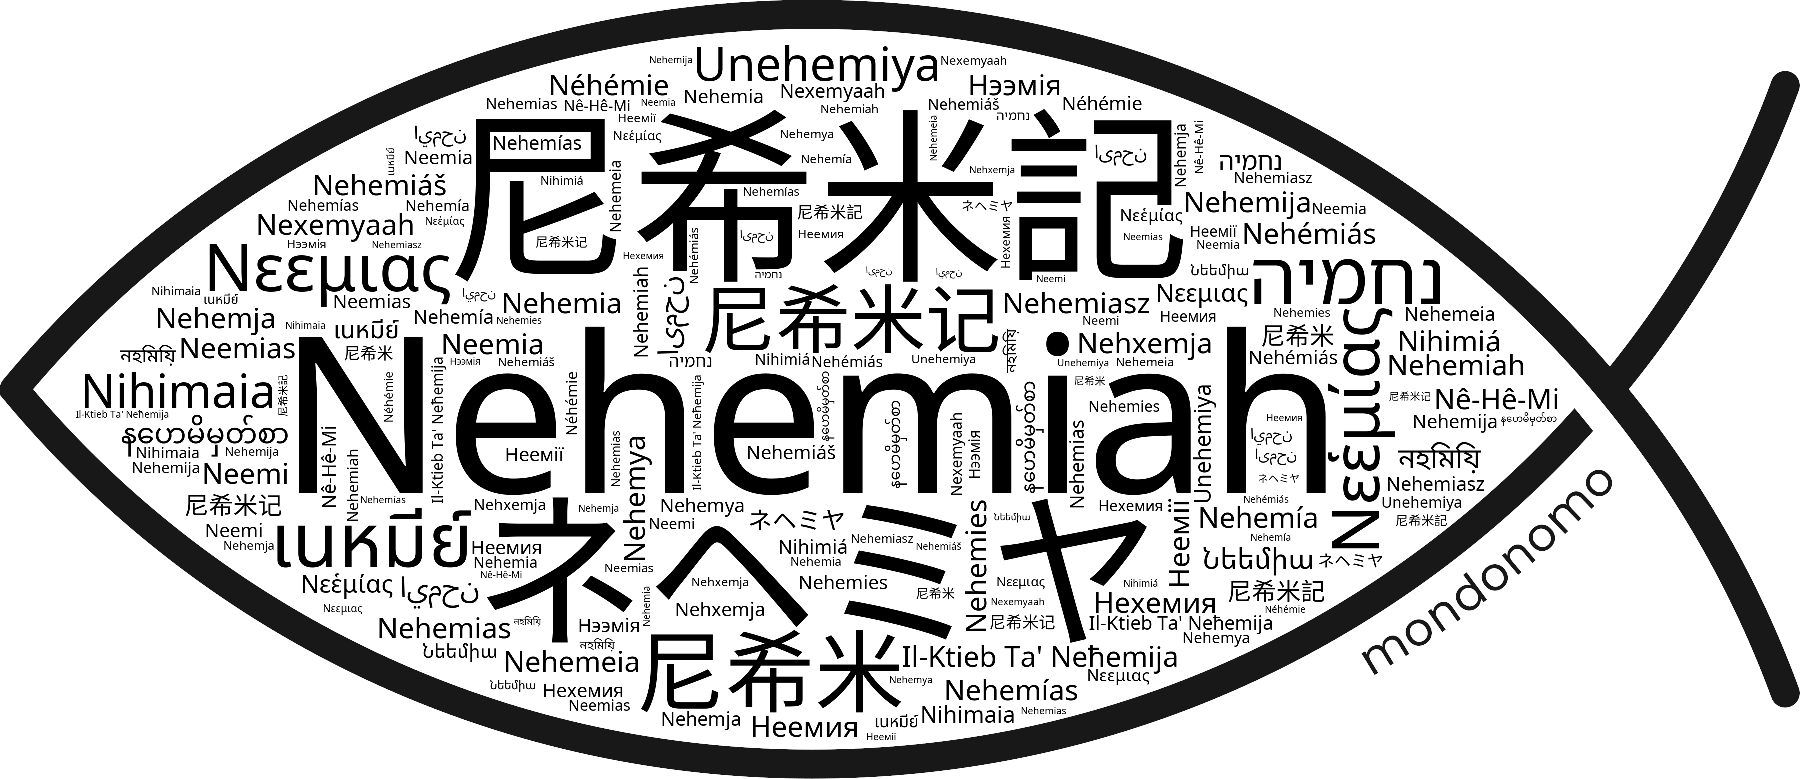 Name Nehemiah in the world's Bibles